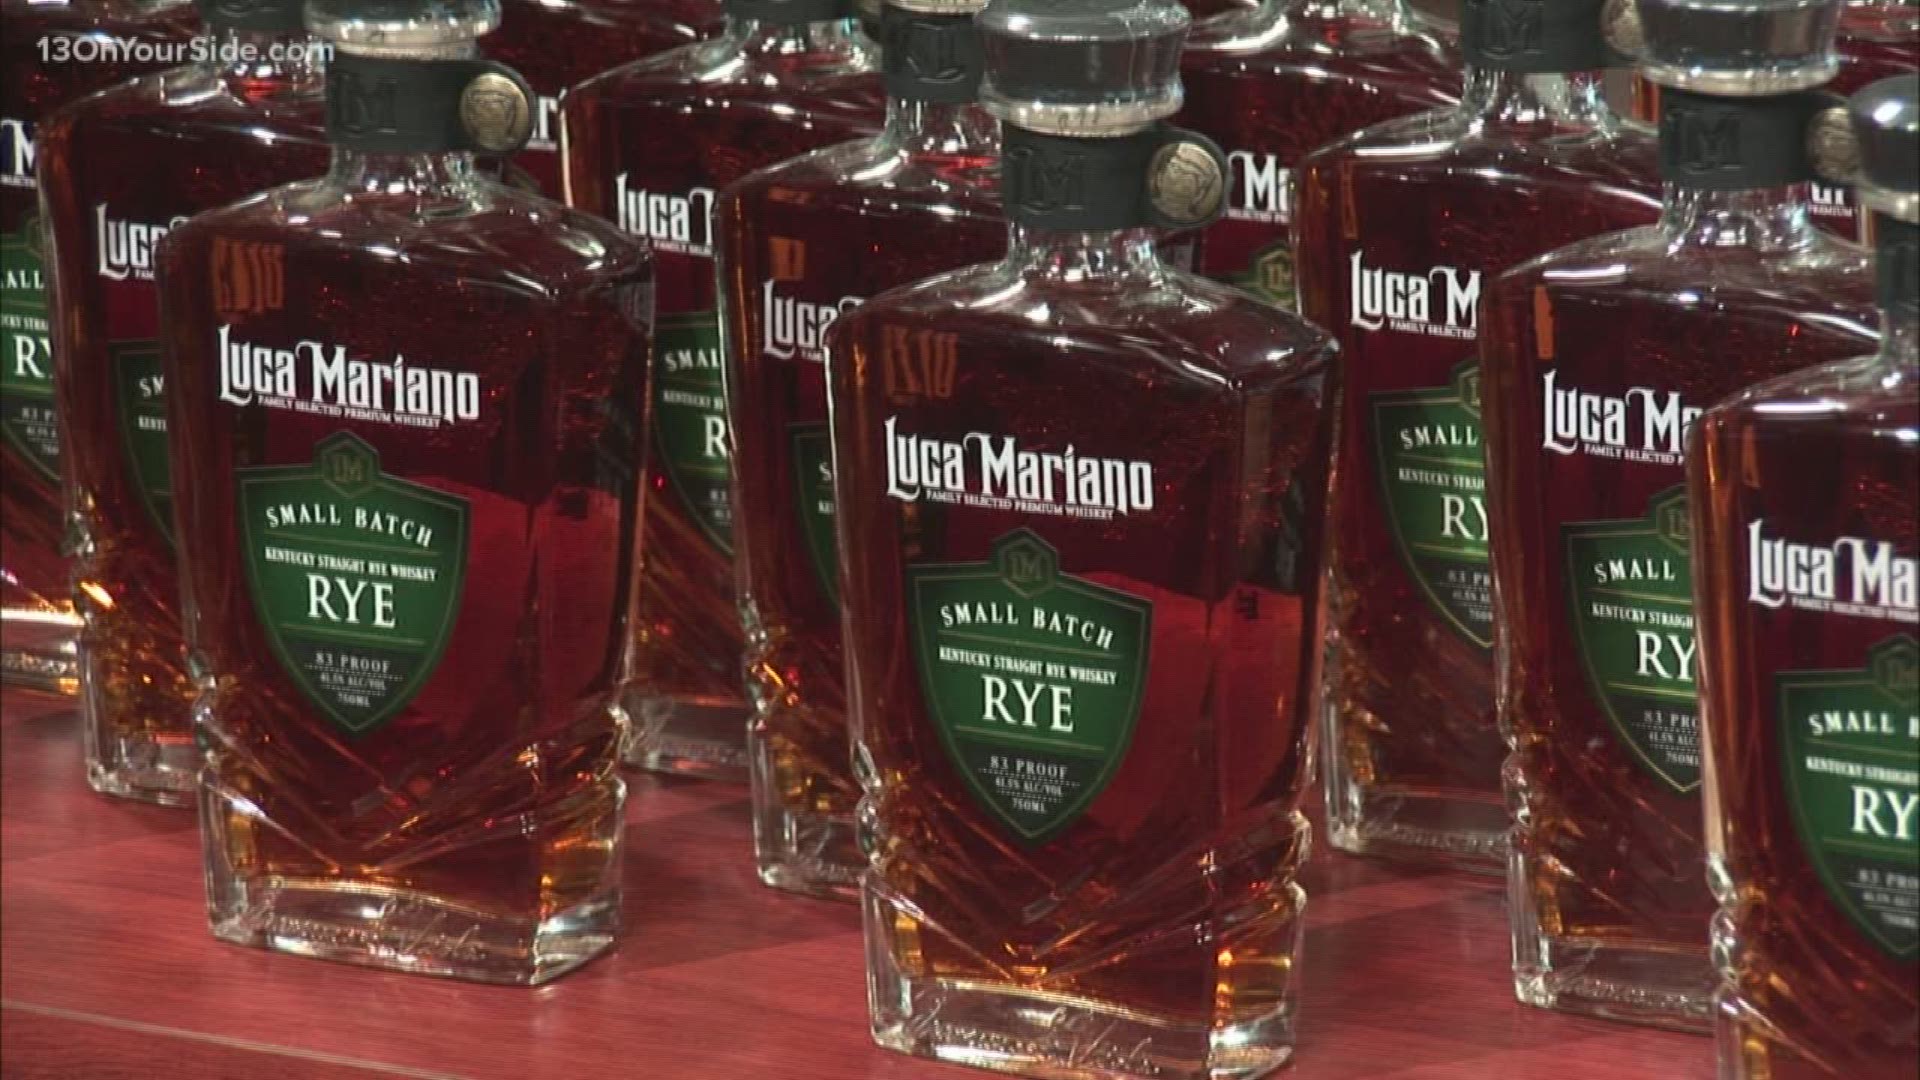 New distiller Luca Mariano launches rye whiskey and bourbon and is hosting a huge launch party in Grand Rapids.